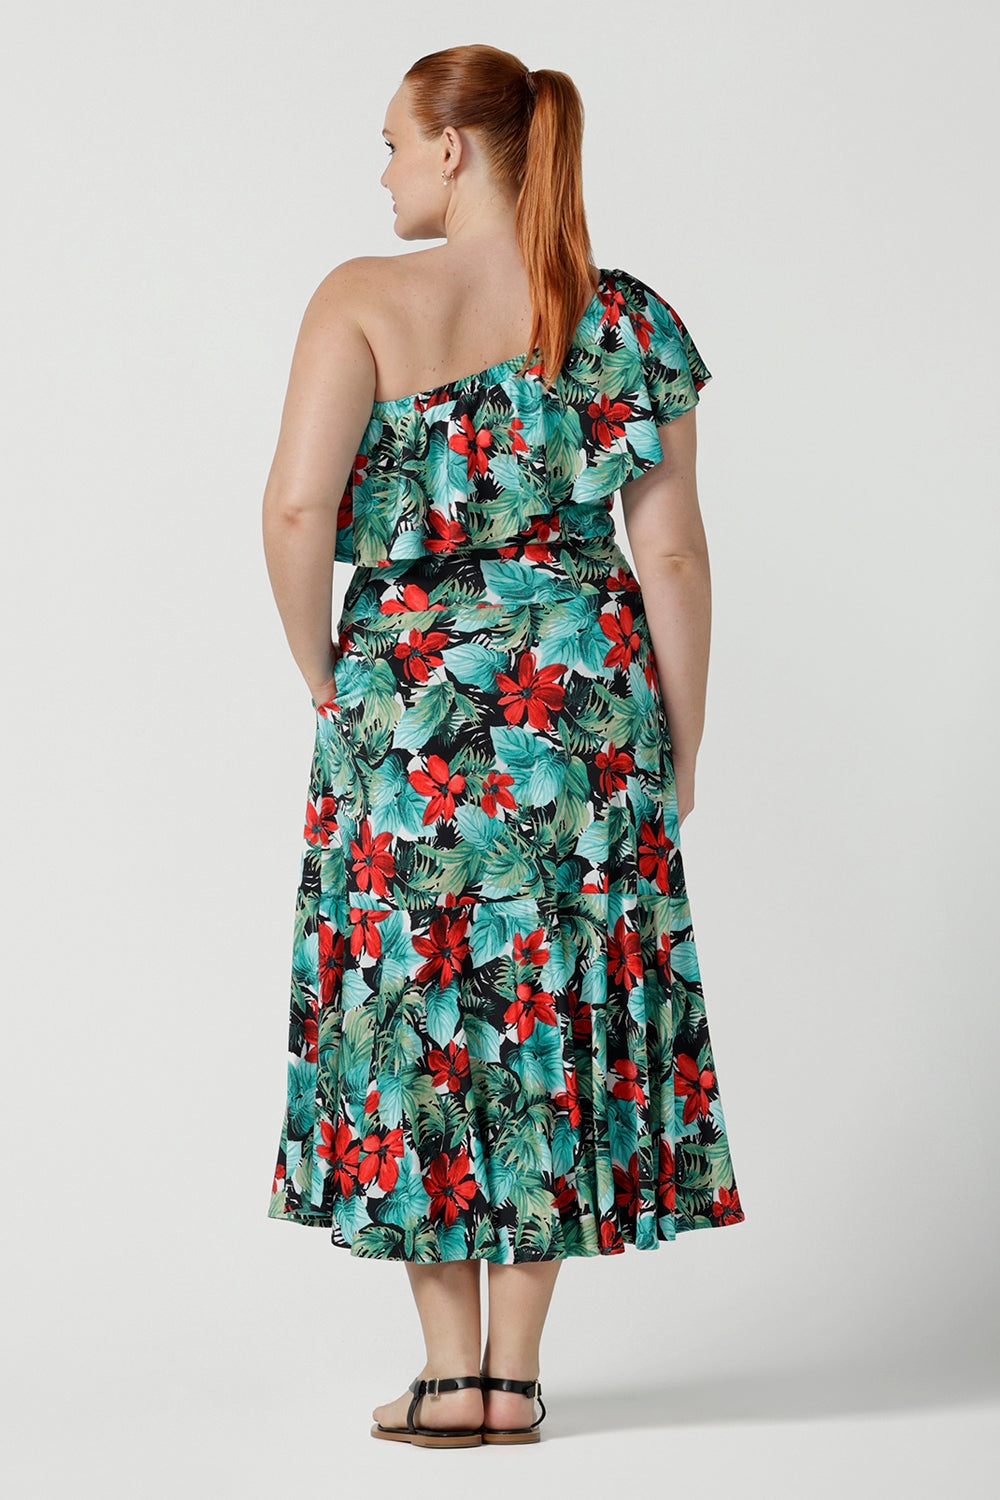 Off shoulder Briar Top in Havana on a size 12 model. Tropical print design with red flowers and green palm leaf. Soft slinky jersey. Wear this top multiple ways one shoulder, off shoulder and on shoulder. Made in Australia for women size 8 - 24.